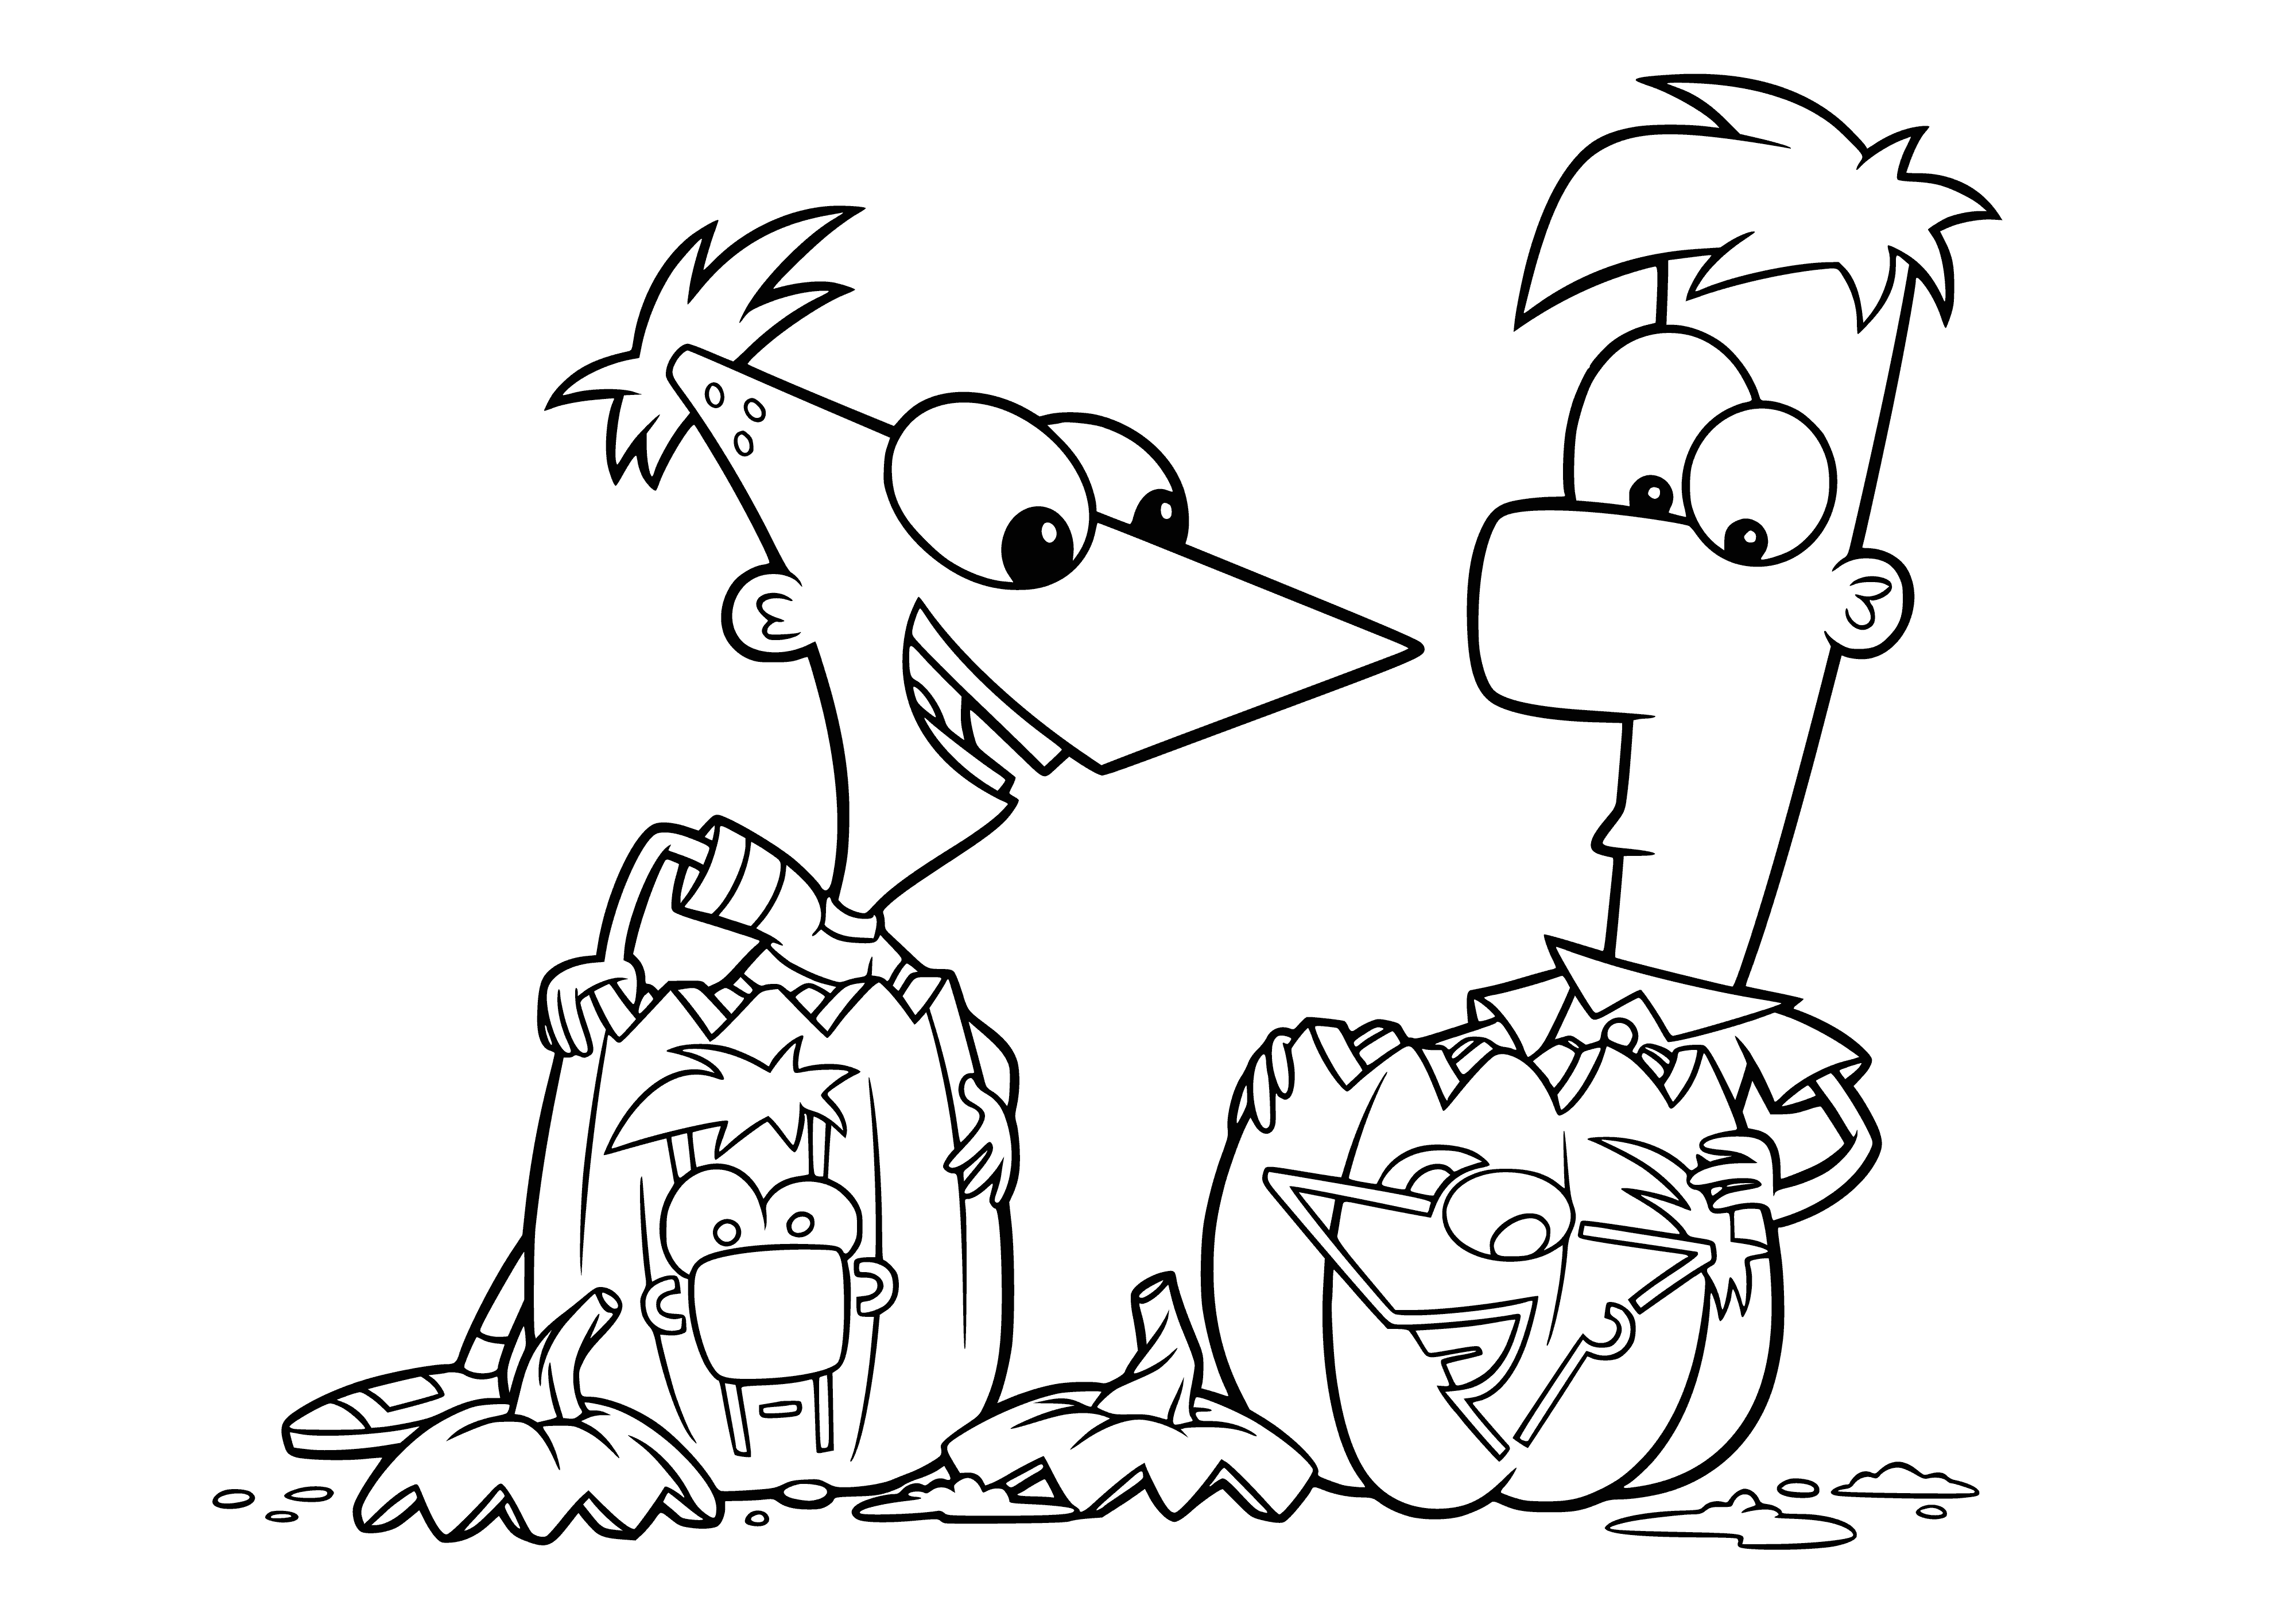 coloring page: Ferb & his mom, dressed as a witch & skeleton, smile in front of a large house. #HalloweenReady